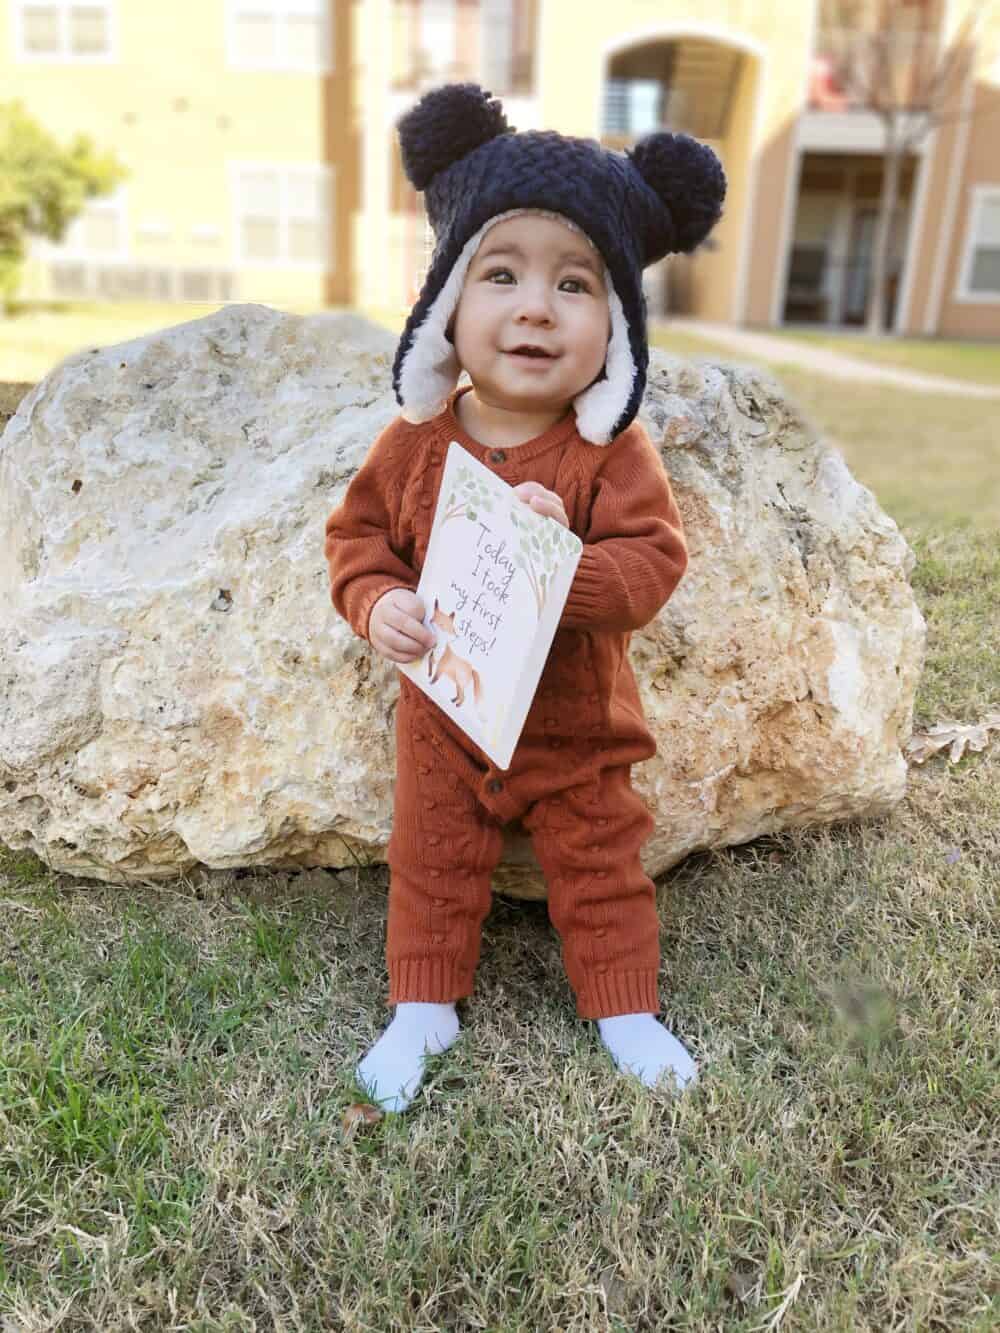 A baby wearing a hat and holding a book.